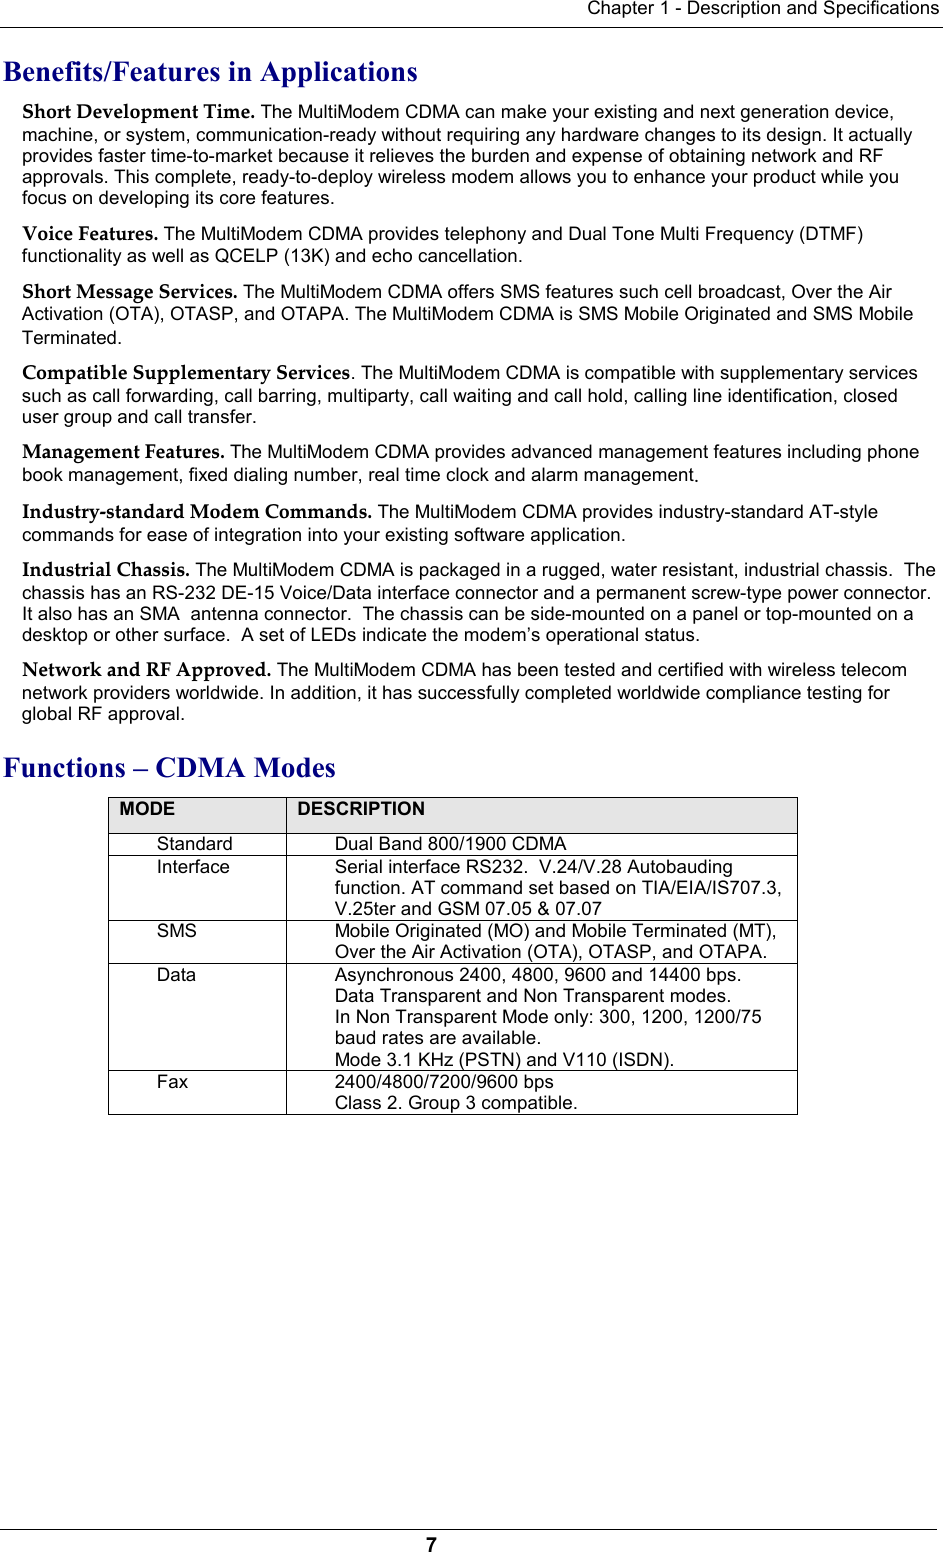 Chapter 1 - Description and Specifications7Benefits/Features in Applications Short Development Time. The MultiModem CDMA can make your existing and next generation device,machine, or system, communication-ready without requiring any hardware changes to its design. It actuallyprovides faster time-to-market because it relieves the burden and expense of obtaining network and RFapprovals. This complete, ready-to-deploy wireless modem allows you to enhance your product while youfocus on developing its core features.Voice Features. The MultiModem CDMA provides telephony and Dual Tone Multi Frequency (DTMF)functionality as well as QCELP (13K) and echo cancellation.Short Message Services. The MultiModem CDMA offers SMS features such cell broadcast, Over the AirActivation (OTA), OTASP, and OTAPA. The MultiModem CDMA is SMS Mobile Originated and SMS MobileTerminated. Compatible Supplementary Services. The MultiModem CDMA is compatible with supplementary servicessuch as call forwarding, call barring, multiparty, call waiting and call hold, calling line identification, closeduser group and call transfer.Management Features. The MultiModem CDMA provides advanced management features including phonebook management, fixed dialing number, real time clock and alarm management.Industry-standard Modem Commands. The MultiModem CDMA provides industry-standard AT-stylecommands for ease of integration into your existing software application.Industrial Chassis. The MultiModem CDMA is packaged in a rugged, water resistant, industrial chassis.  Thechassis has an RS-232 DE-15 Voice/Data interface connector and a permanent screw-type power connector.It also has an SMA  antenna connector.  The chassis can be side-mounted on a panel or top-mounted on adesktop or other surface.  A set of LEDs indicate the modem’s operational status.Network and RF Approved. The MultiModem CDMA has been tested and certified with wireless telecomnetwork providers worldwide. In addition, it has successfully completed worldwide compliance testing forglobal RF approval.Functions – CDMA ModesMODE DESCRIPTIONStandard Dual Band 800/1900 CDMAInterface Serial interface RS232.  V.24/V.28 Autobaudingfunction. AT command set based on TIA/EIA/IS707.3,V.25ter and GSM 07.05 &amp; 07.07SMS Mobile Originated (MO) and Mobile Terminated (MT),Over the Air Activation (OTA), OTASP, and OTAPA.Data Asynchronous 2400, 4800, 9600 and 14400 bps.Data Transparent and Non Transparent modes.In Non Transparent Mode only: 300, 1200, 1200/75baud rates are available.Mode 3.1 KHz (PSTN) and V110 (ISDN).Fax 2400/4800/7200/9600 bpsClass 2. Group 3 compatible.